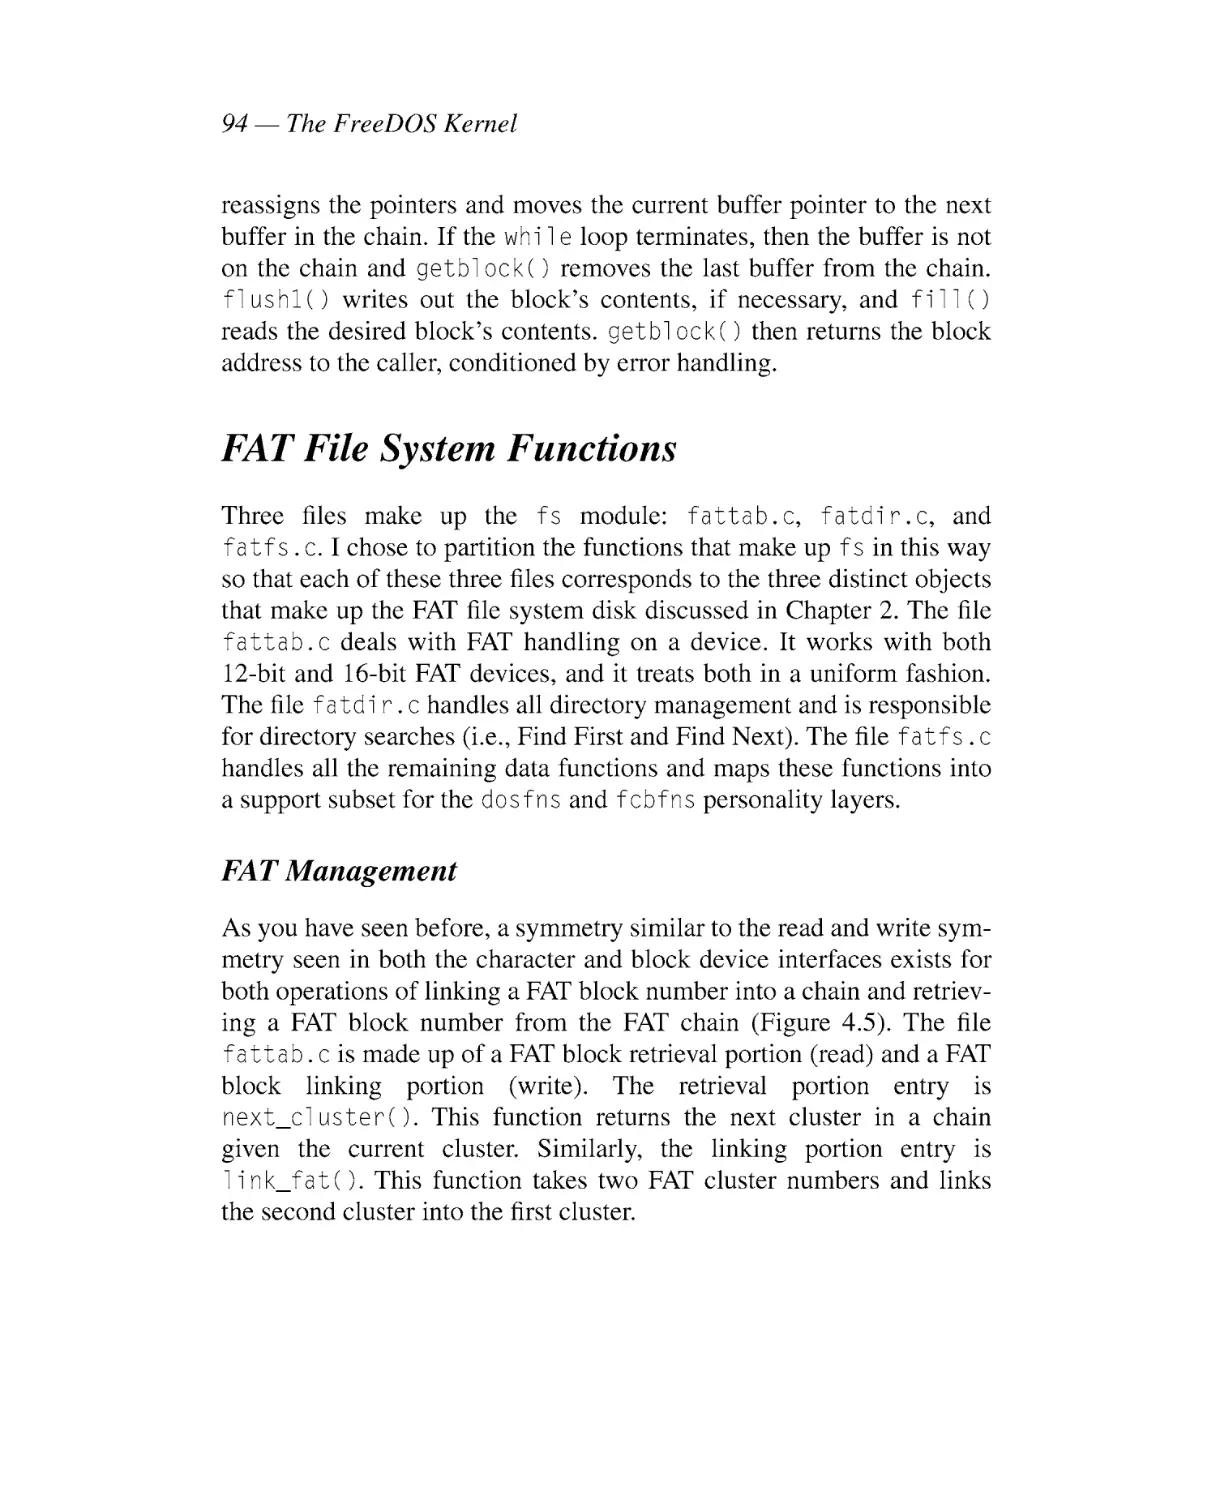 FAT File System Functions
FAT Management